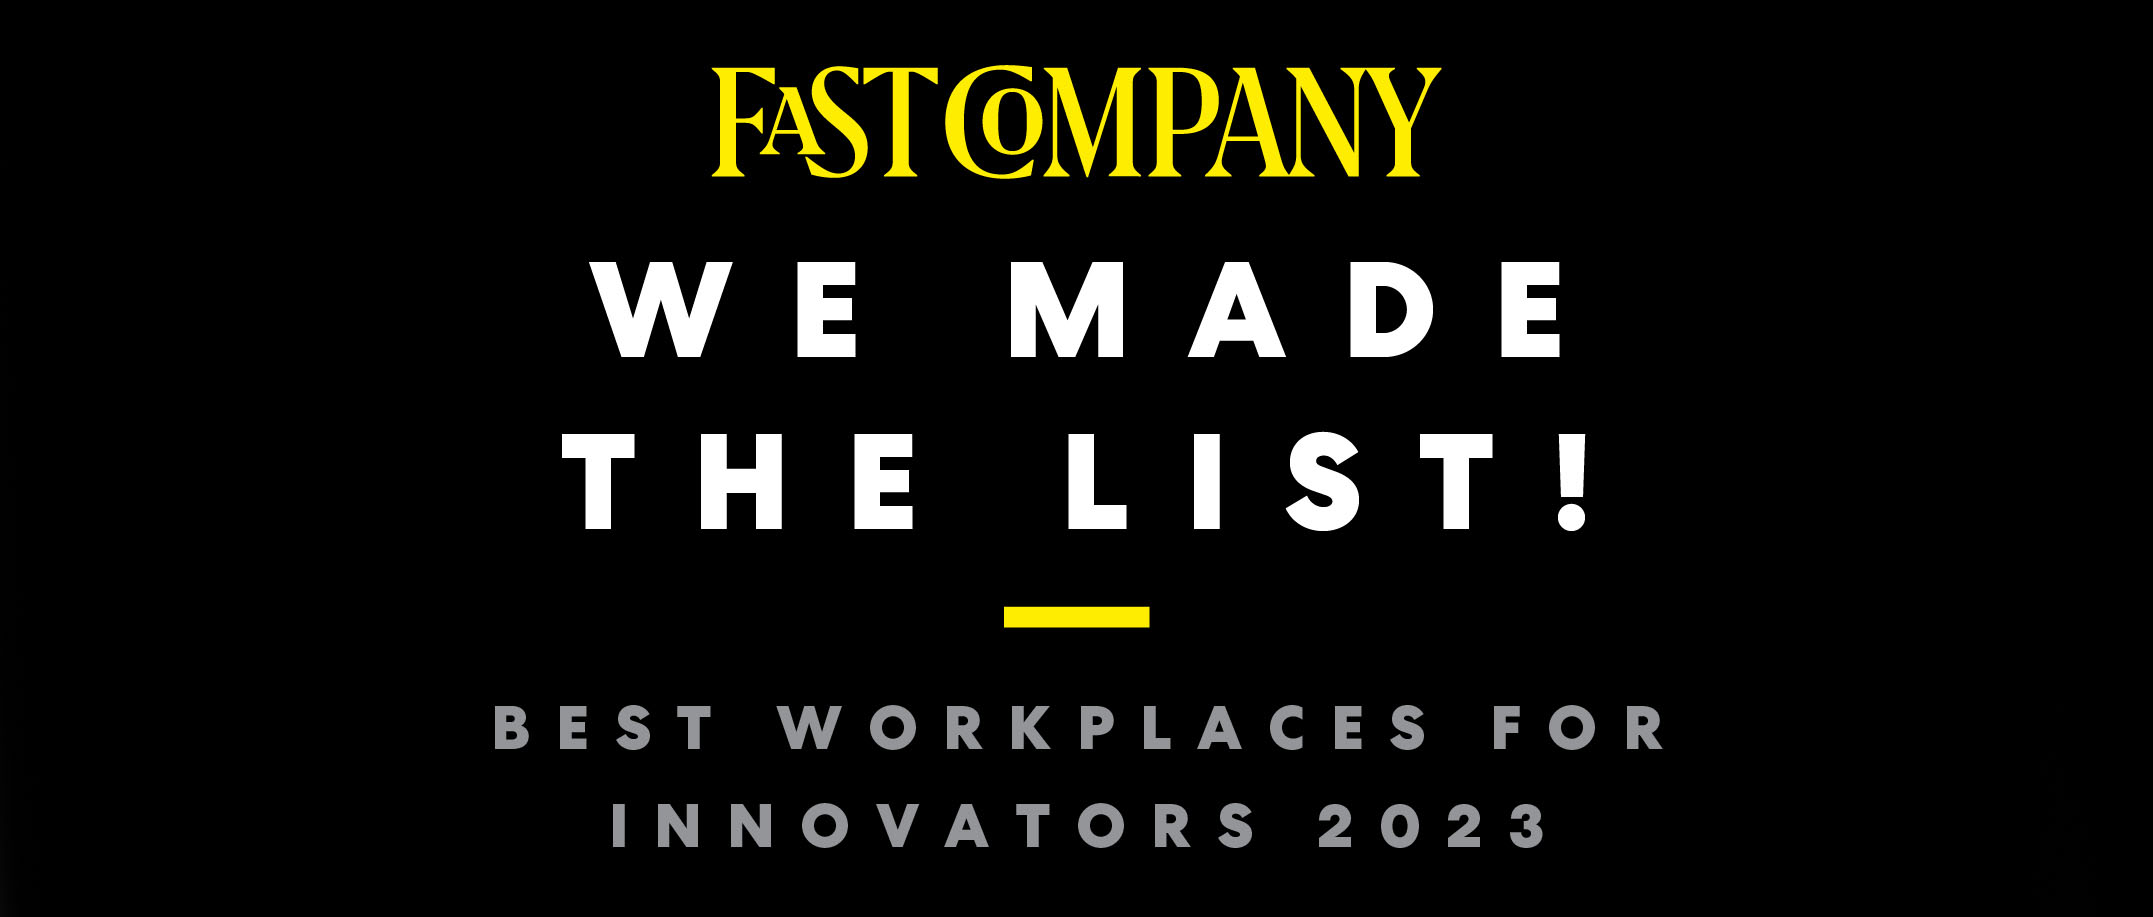 100 Best Workplaces for Innovators 2023